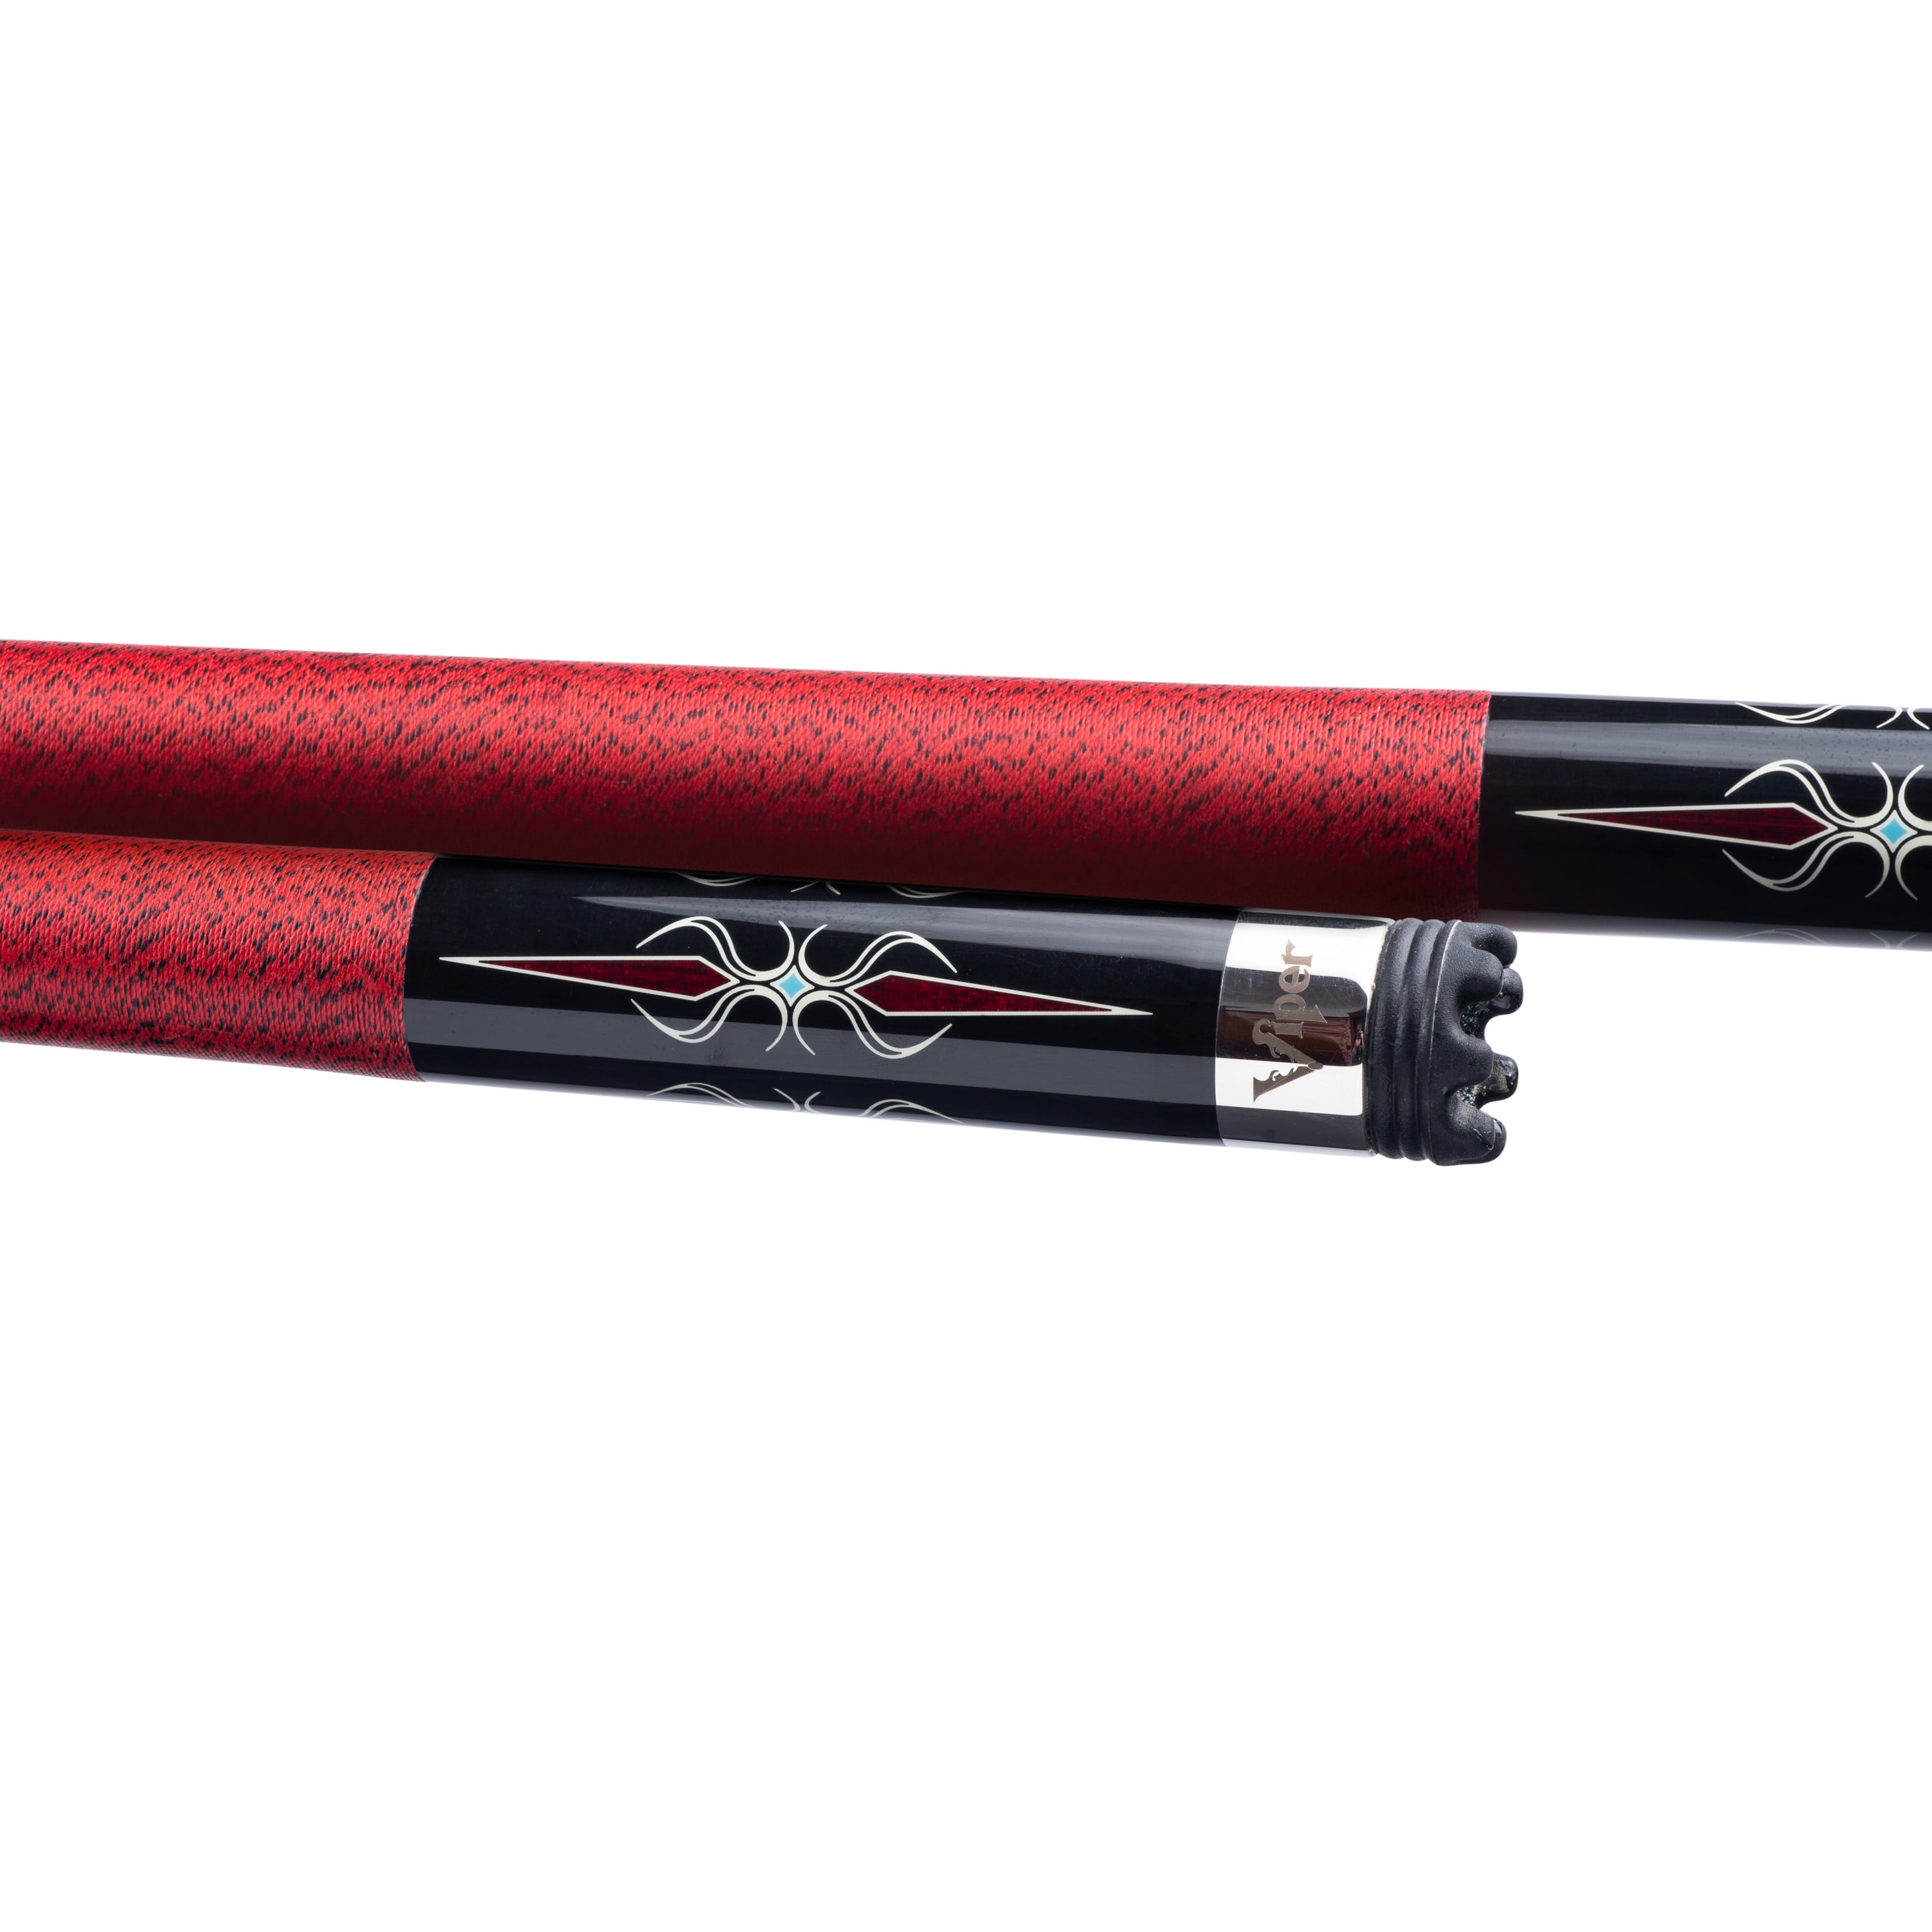 Black with Maroon/Cream Points Viper Sinister 58 2-Piece Billiard/Pool Cue